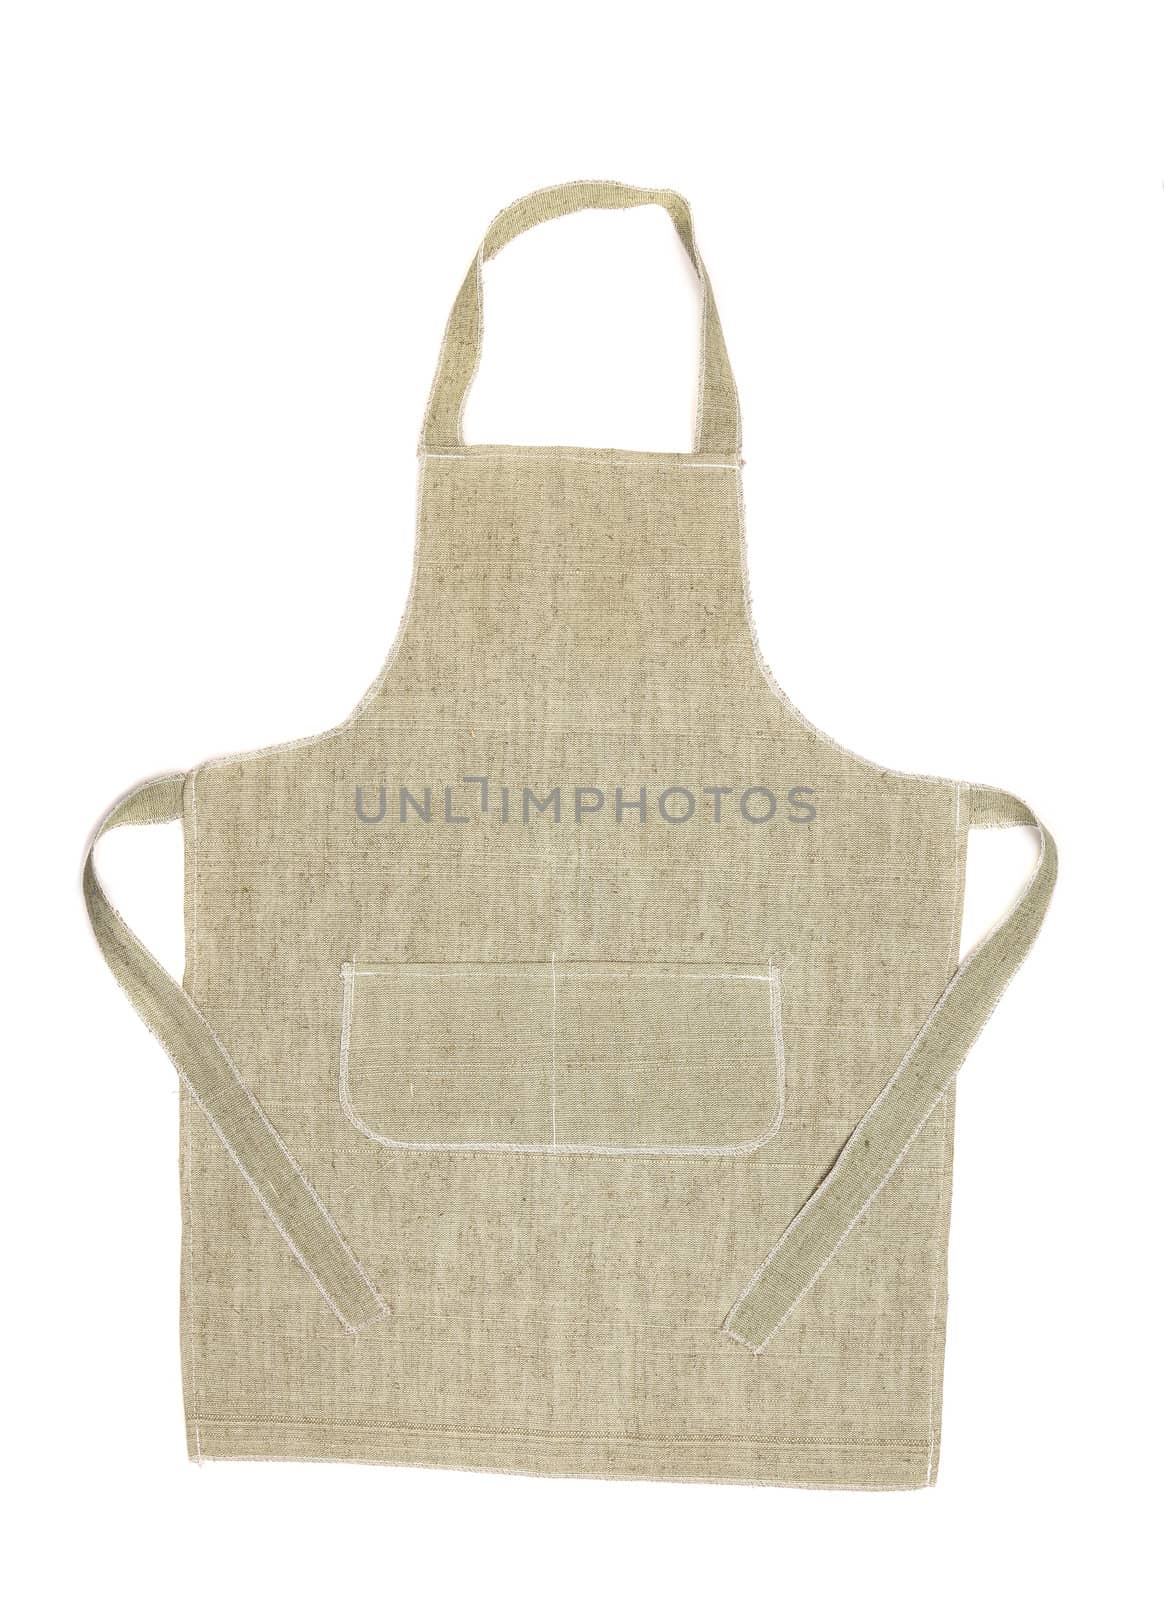 Kitchen gray apron. Isolated on a white background.